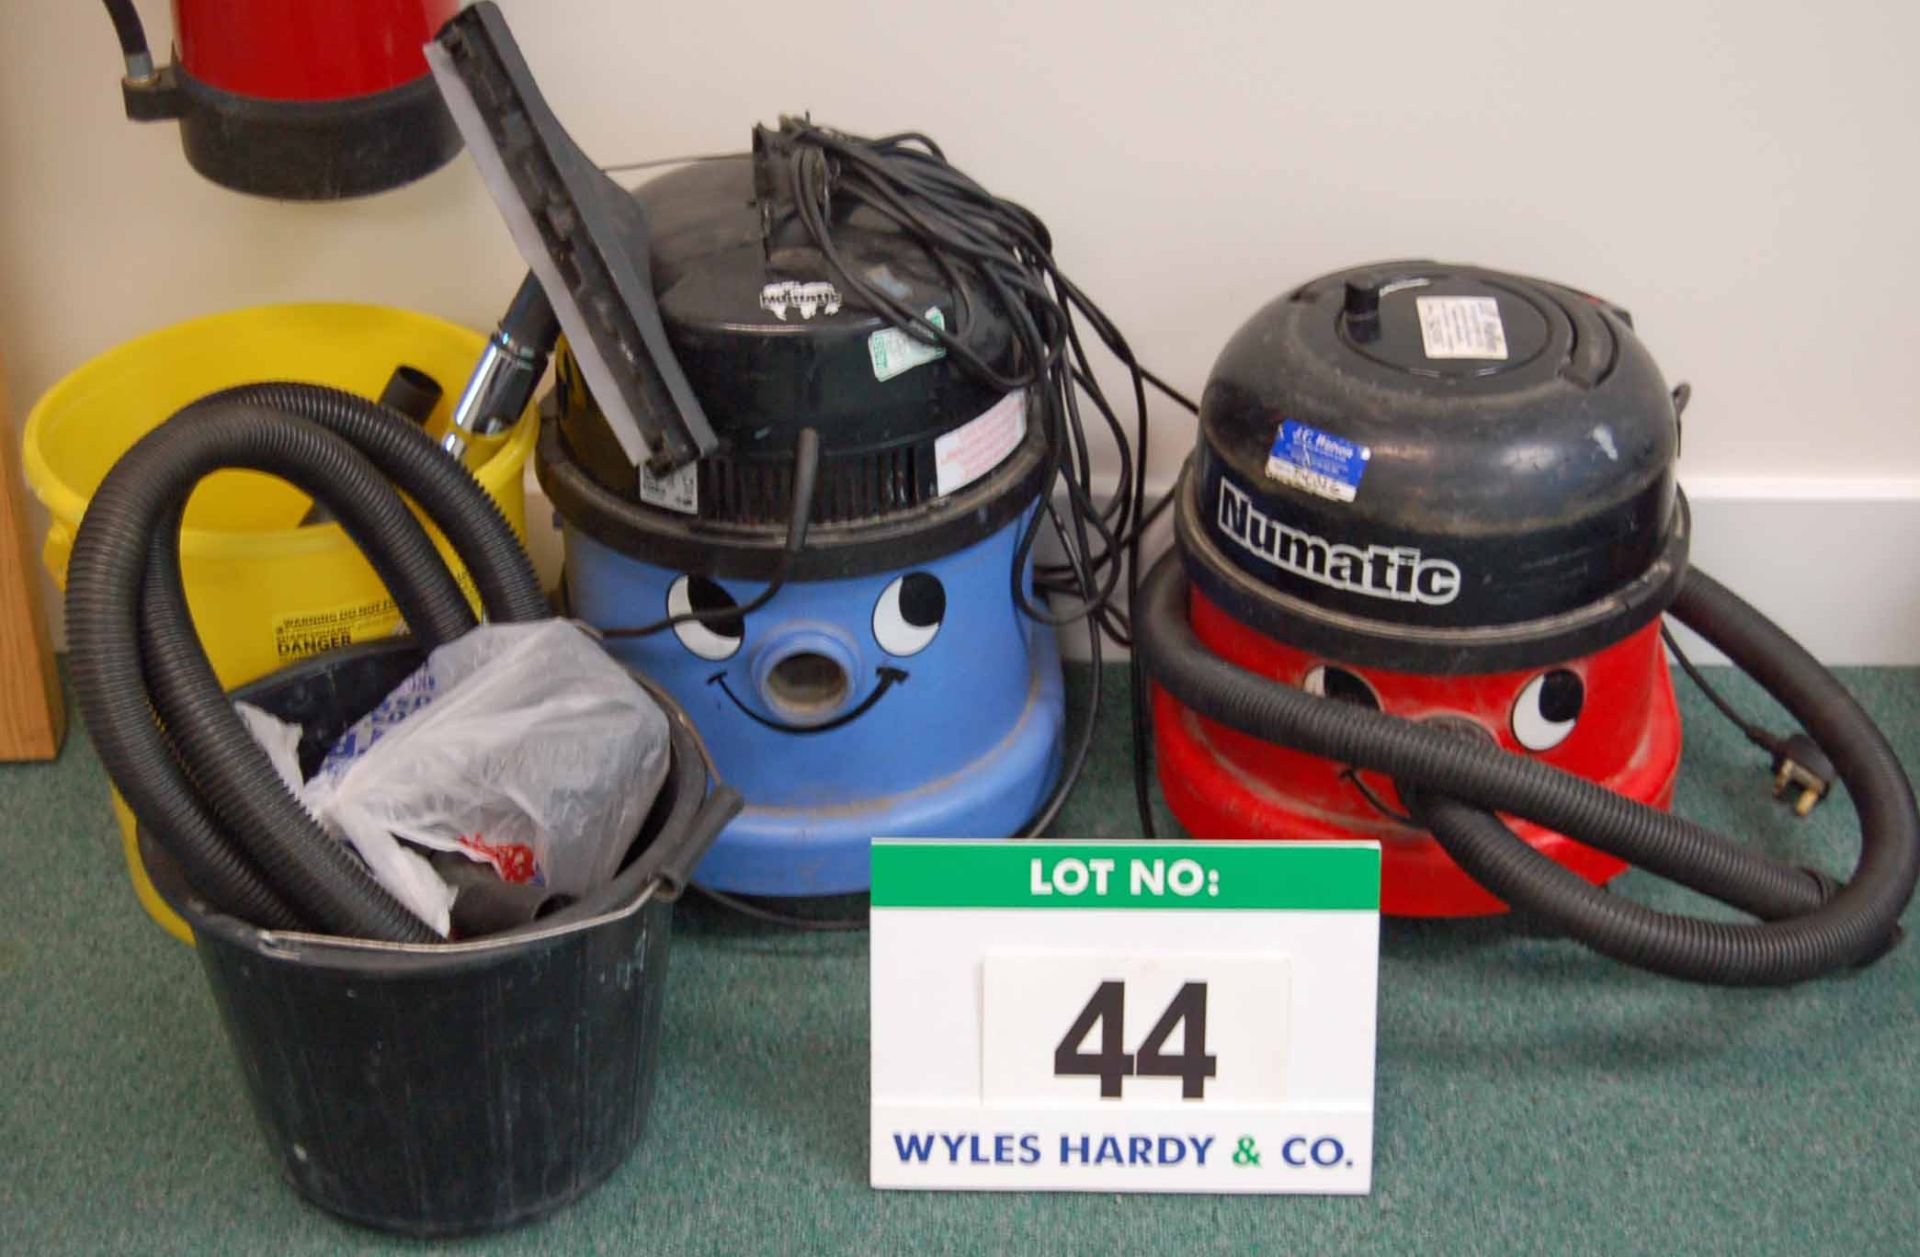 A NUMATIC Charles Wet/Dry Vacuum Cleaner and A NUMATIC Henry Vacuum Cleaner with Accessories (As